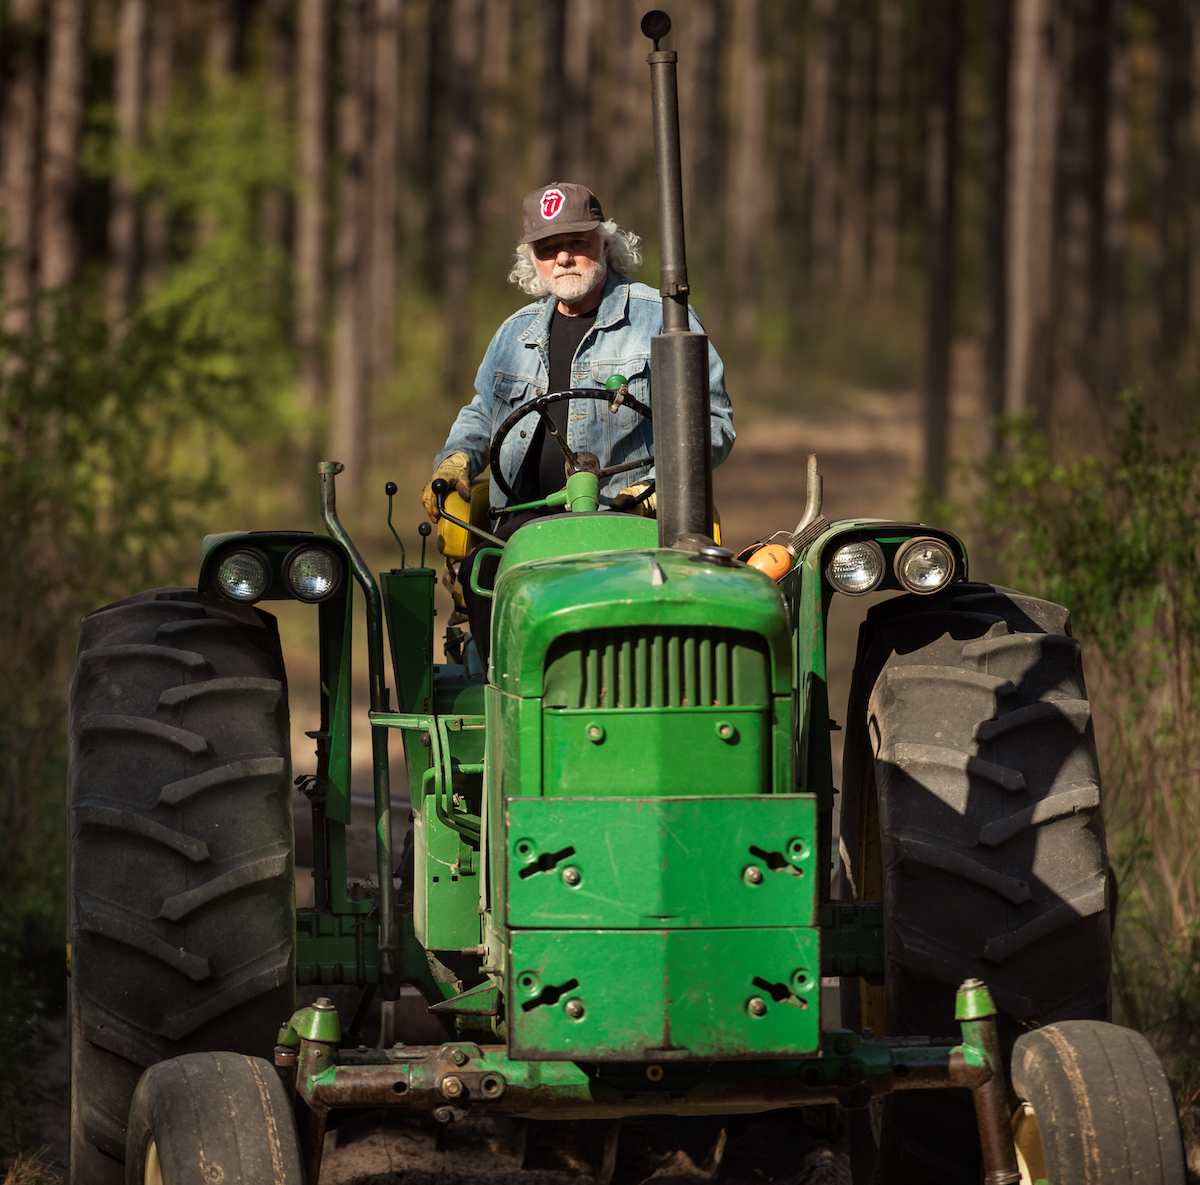 Chuck Leavell on a tractor.